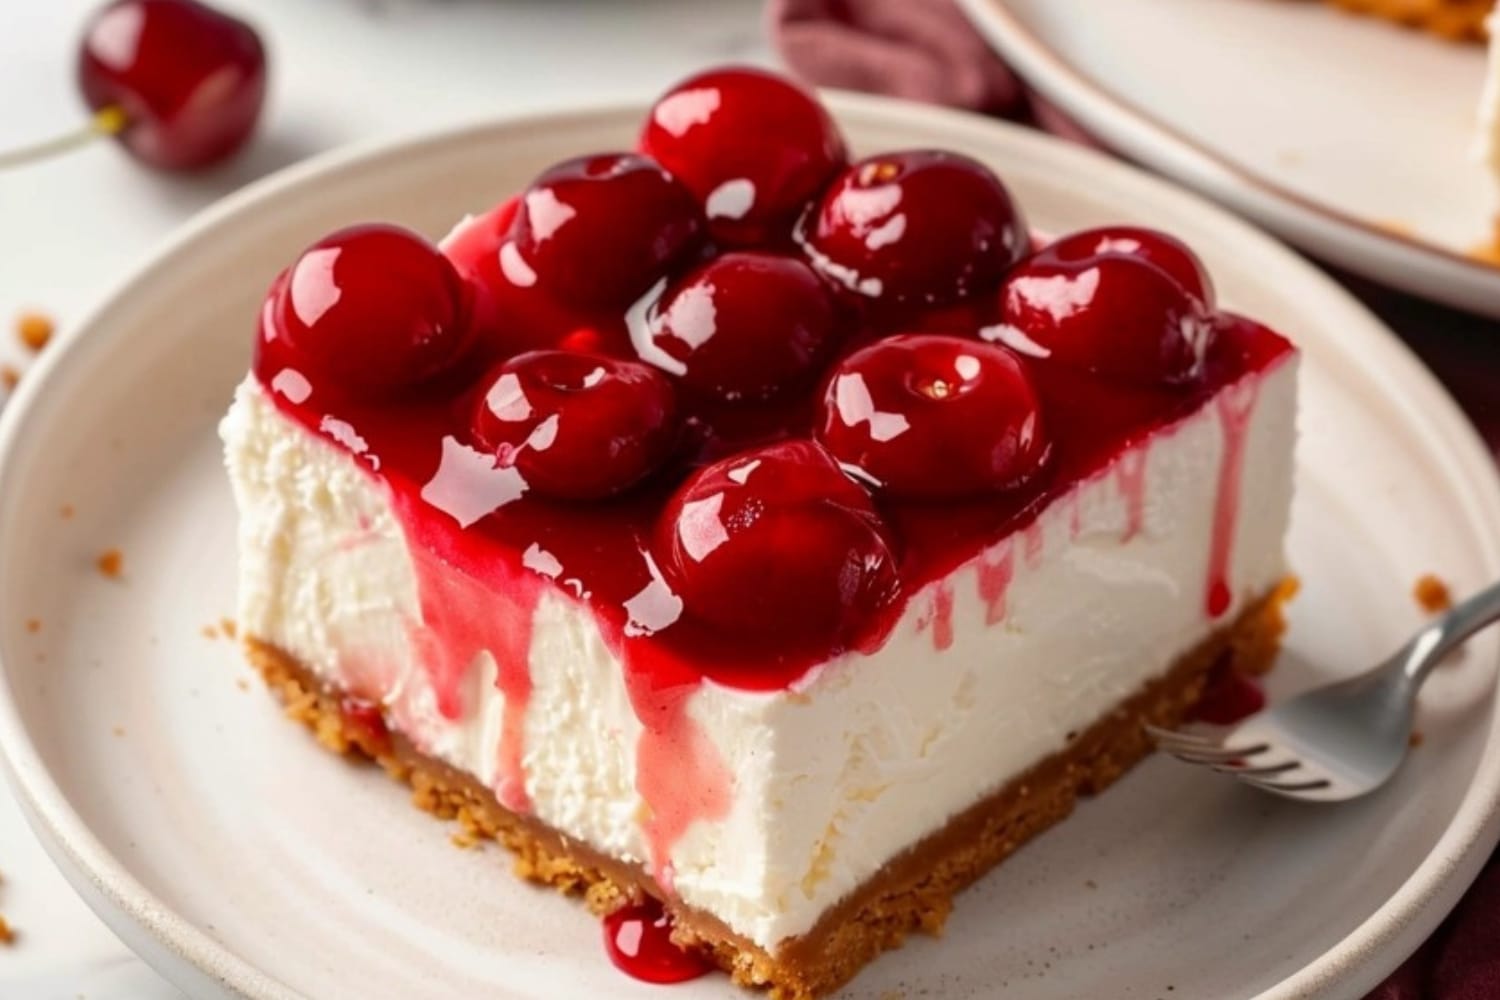 A slice of cherry delight in a white plate with fork on the side.